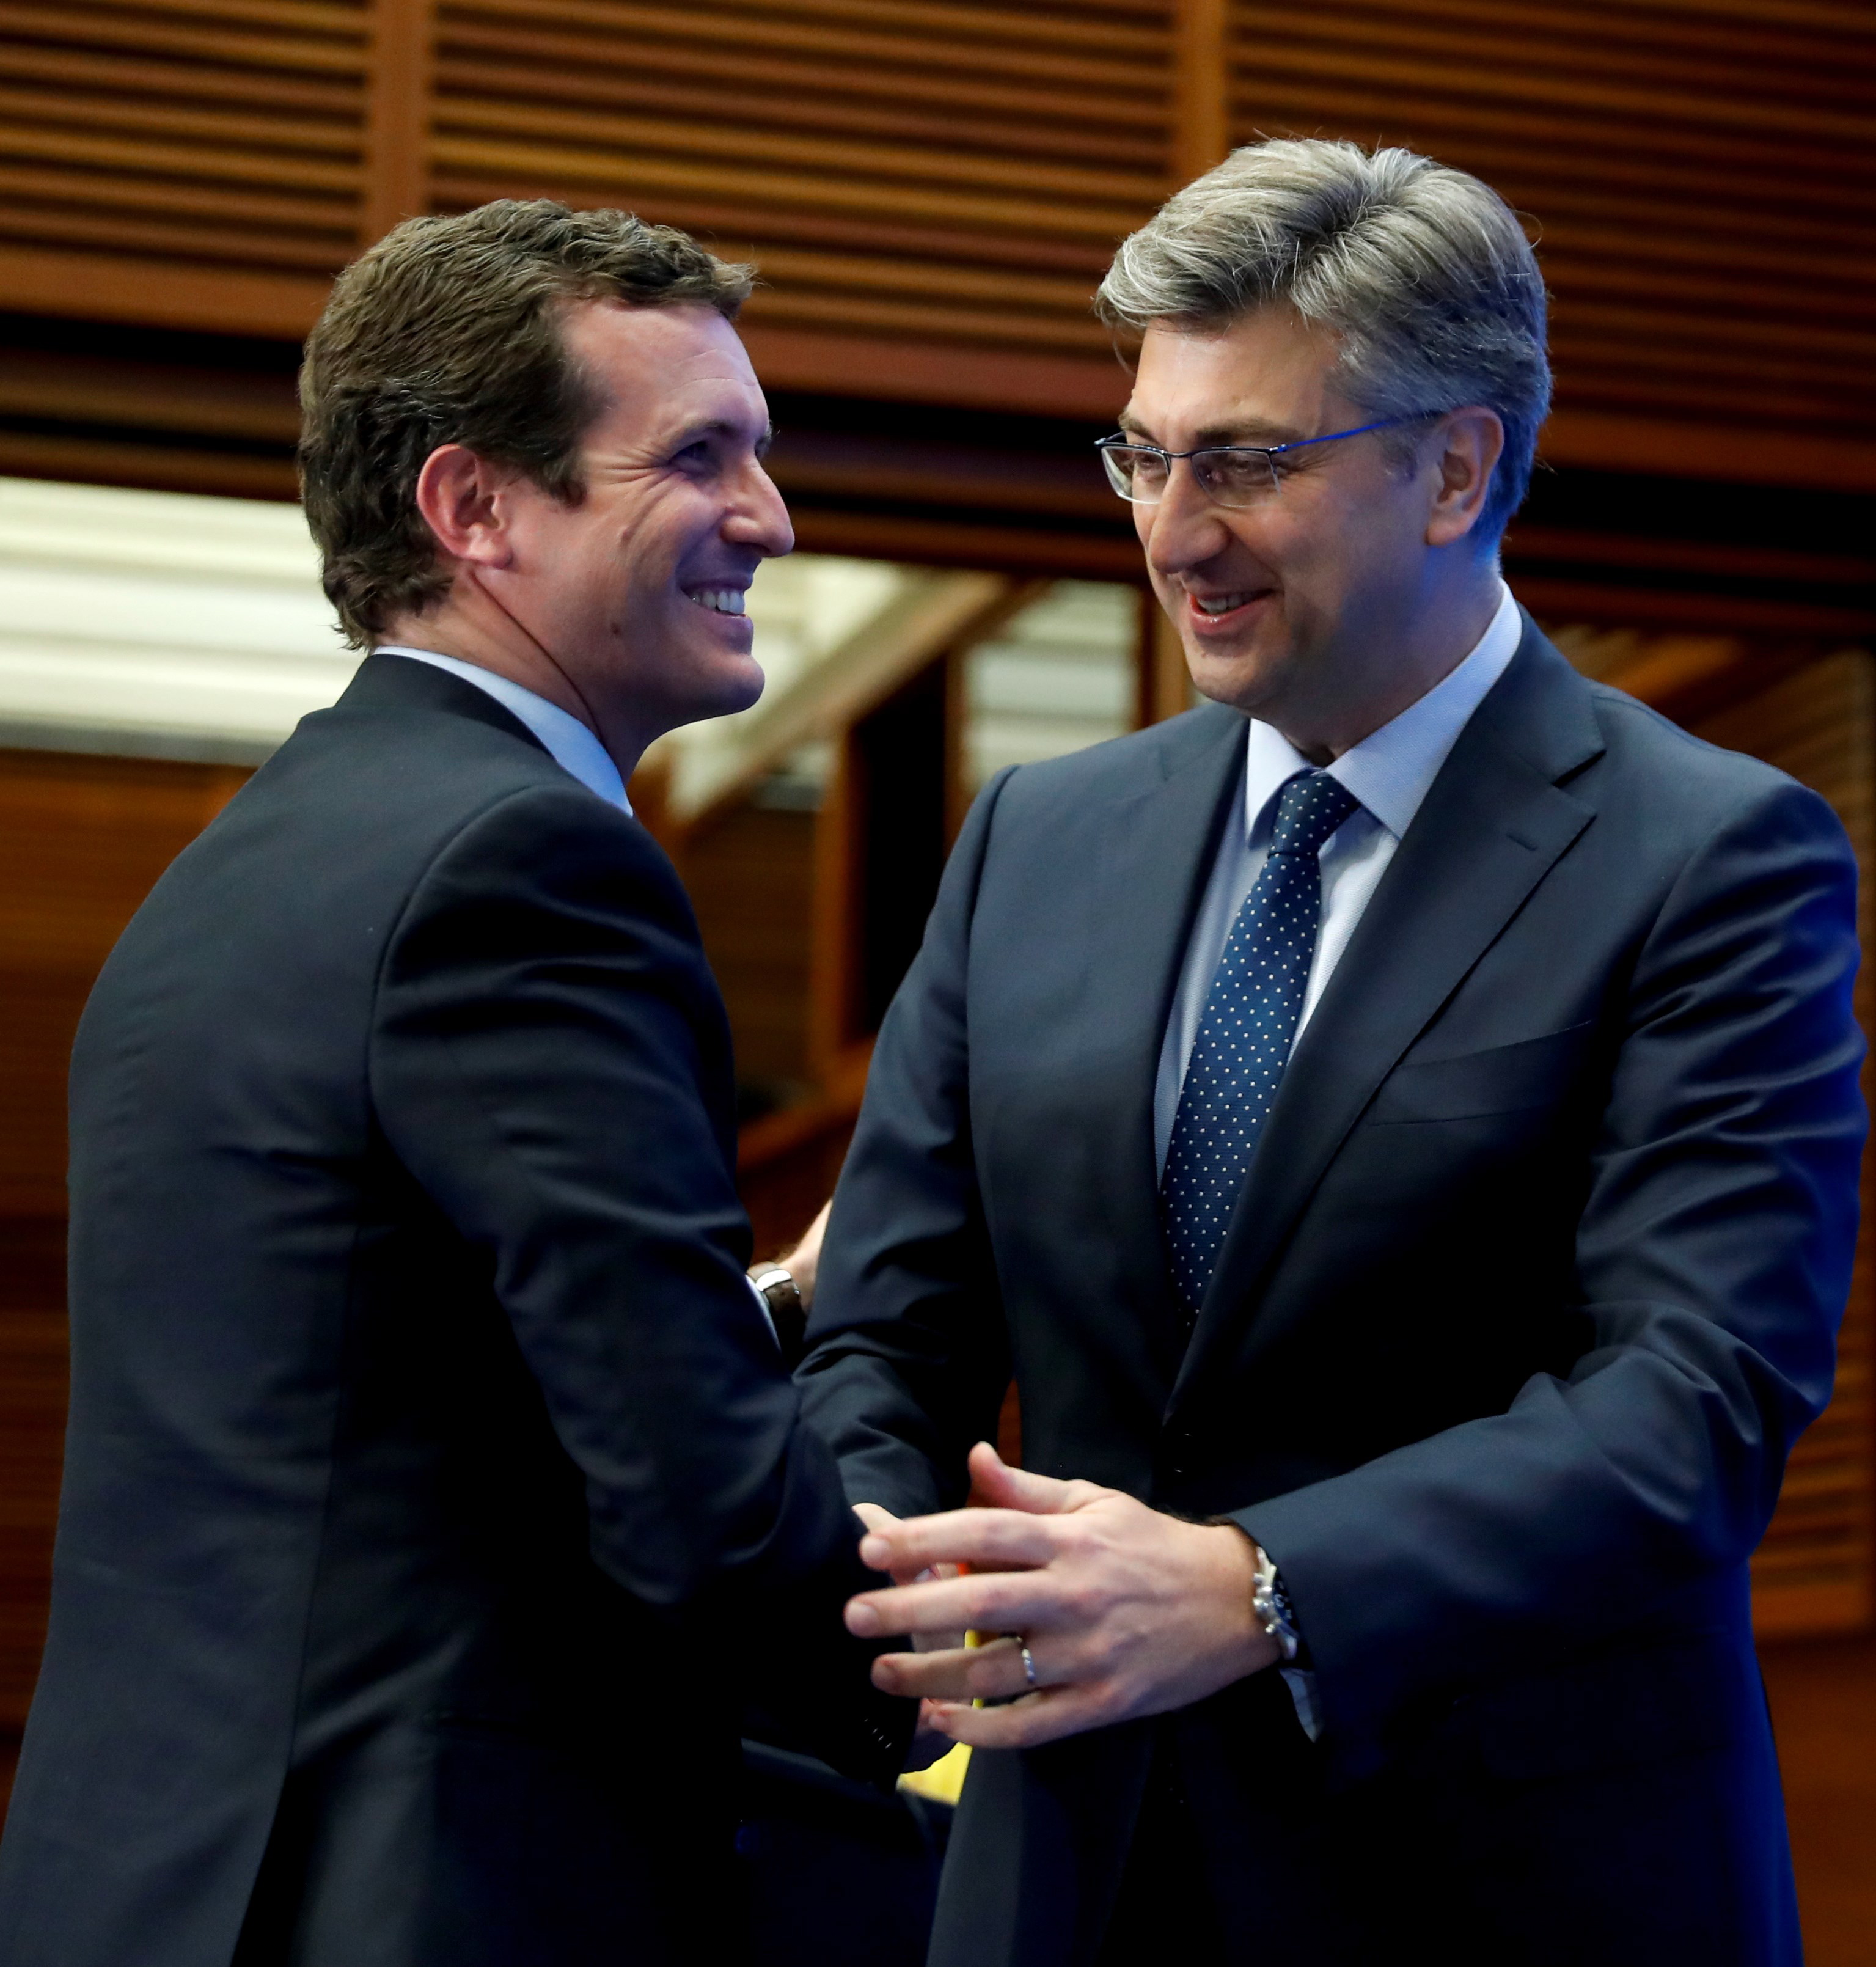 epa07643135 People's Party (PP) leader, Pablo Casado (L), greets Croatian Prime Minister, Andrej Plenkovic, as they attend the European People's Party (EPP) Group Study Days at the Kursaal Congress Palace in San Sebastian, Spain, 12 June 2019. EPP Group Study Days event takes place from 11 to 13 June.  EPA/Juan Herrero